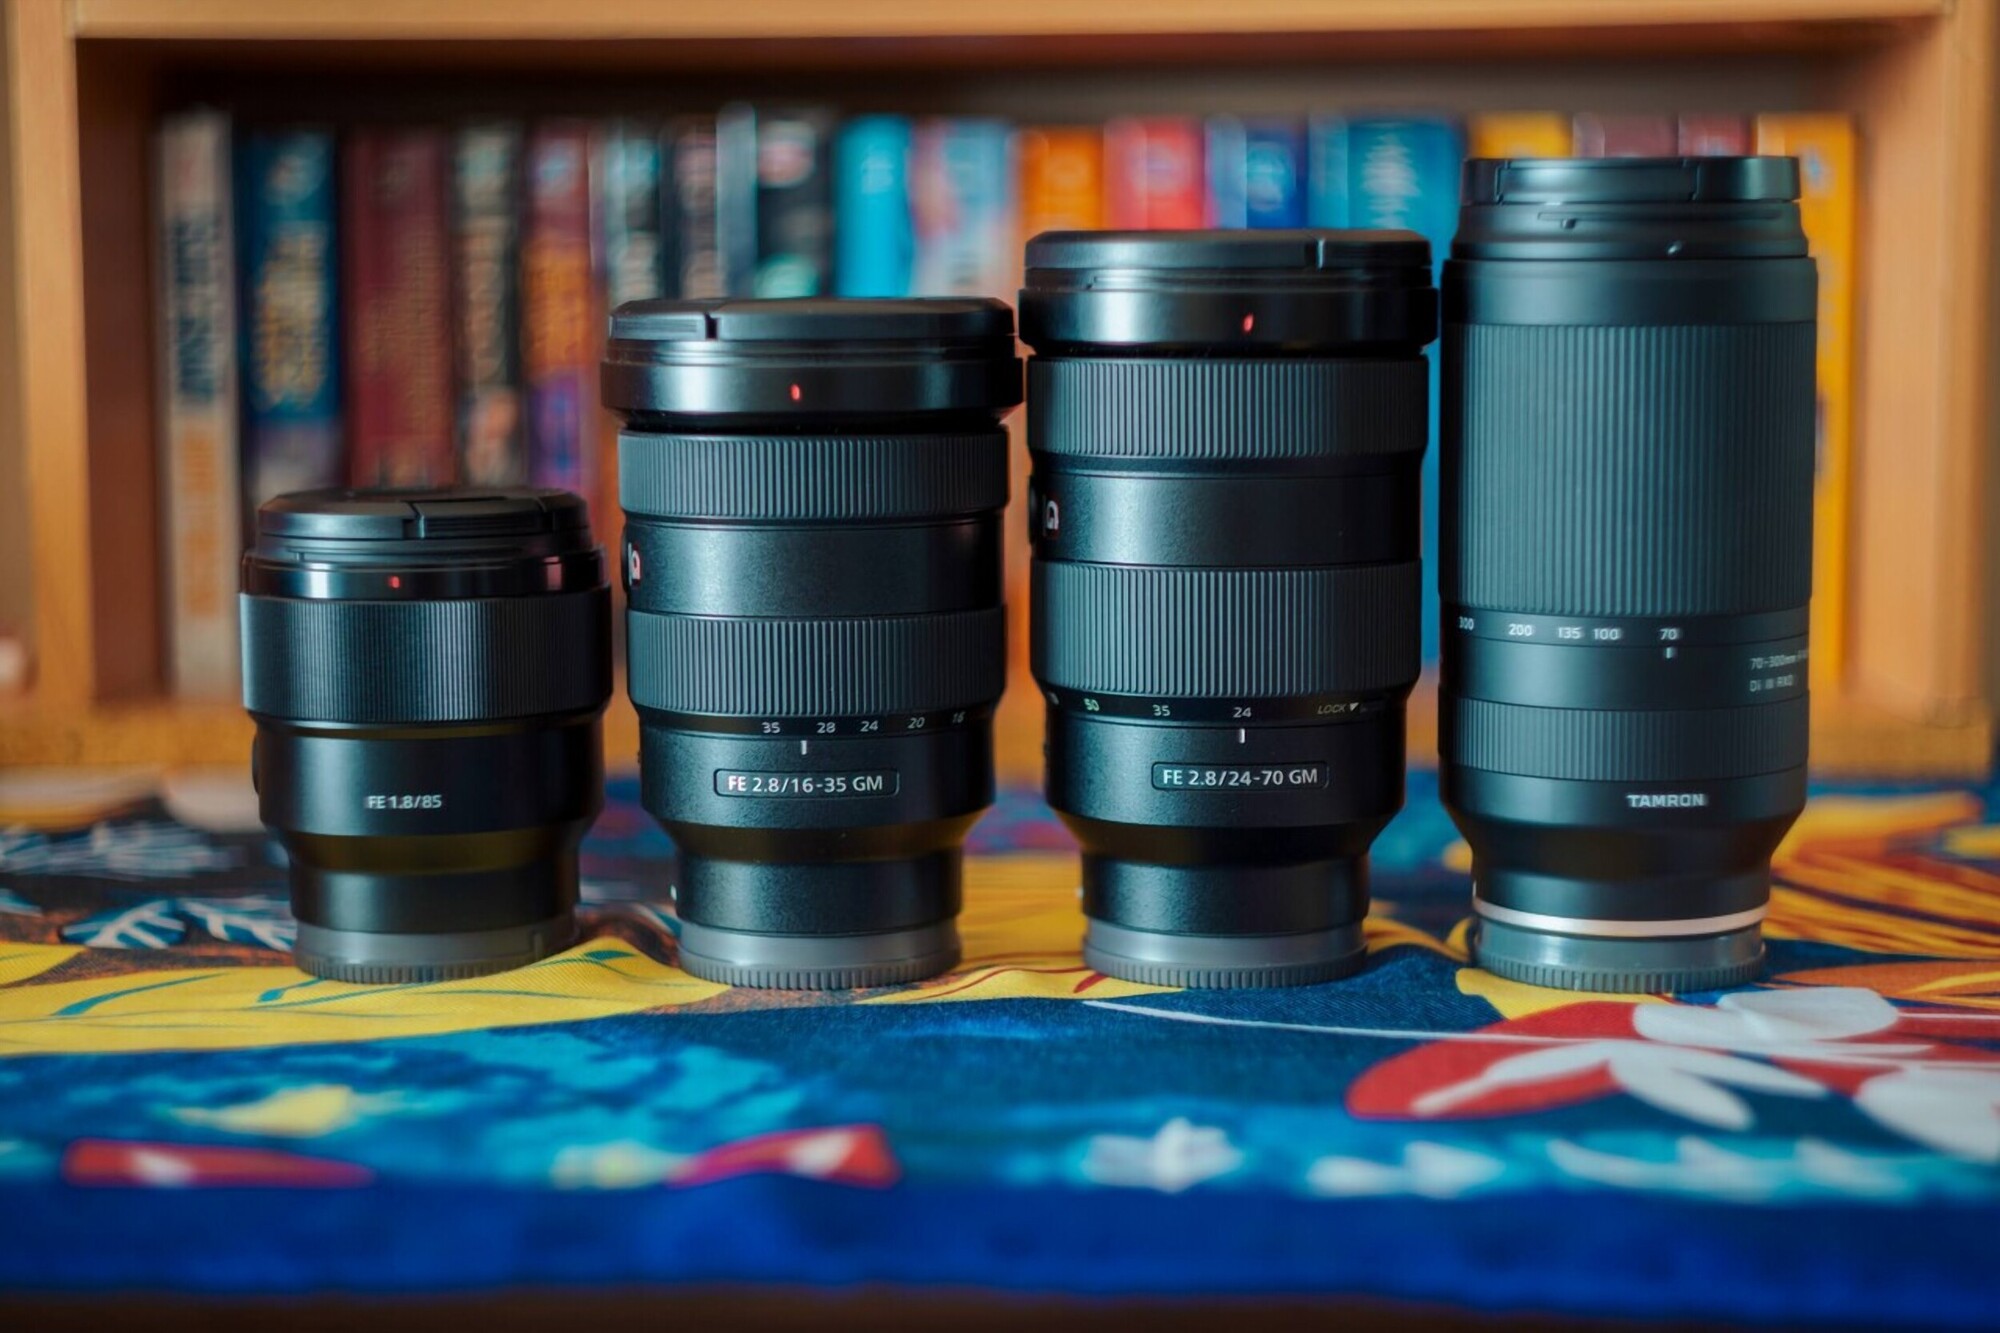 Sony 24-70mm f4 vs Tamron 28-75mm f2.8 - Which one is best for you? 